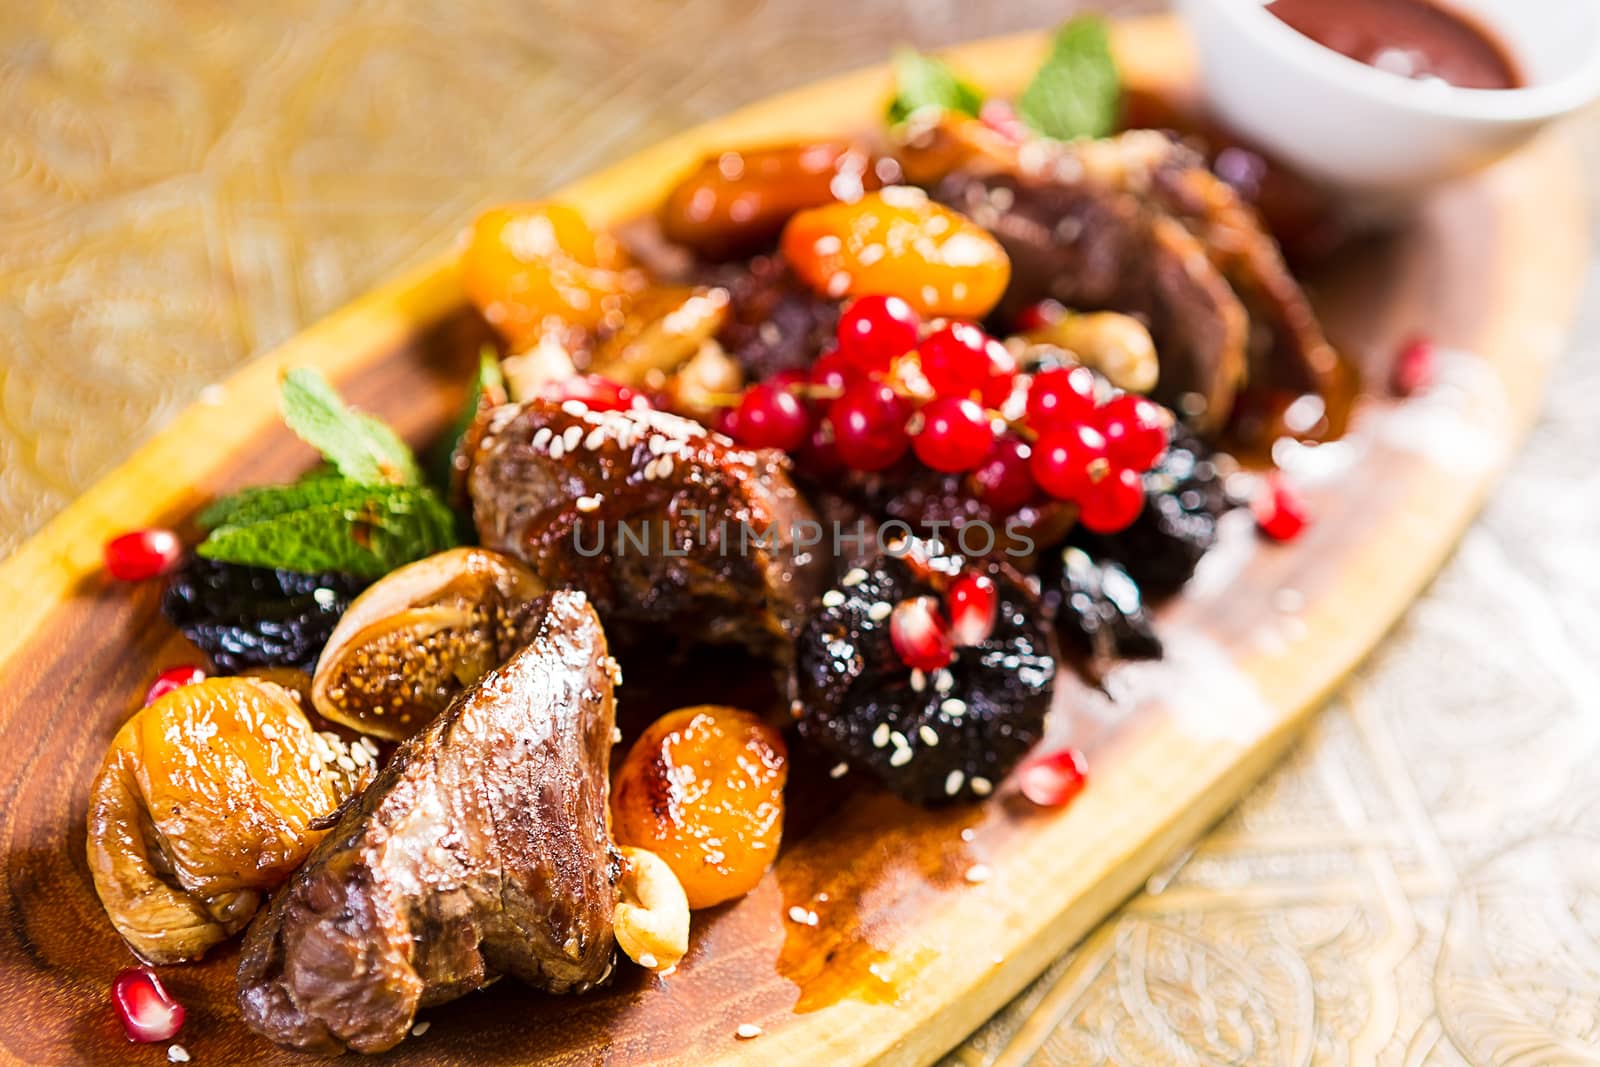 pieces of lamb cooked on the grill. served with fruit